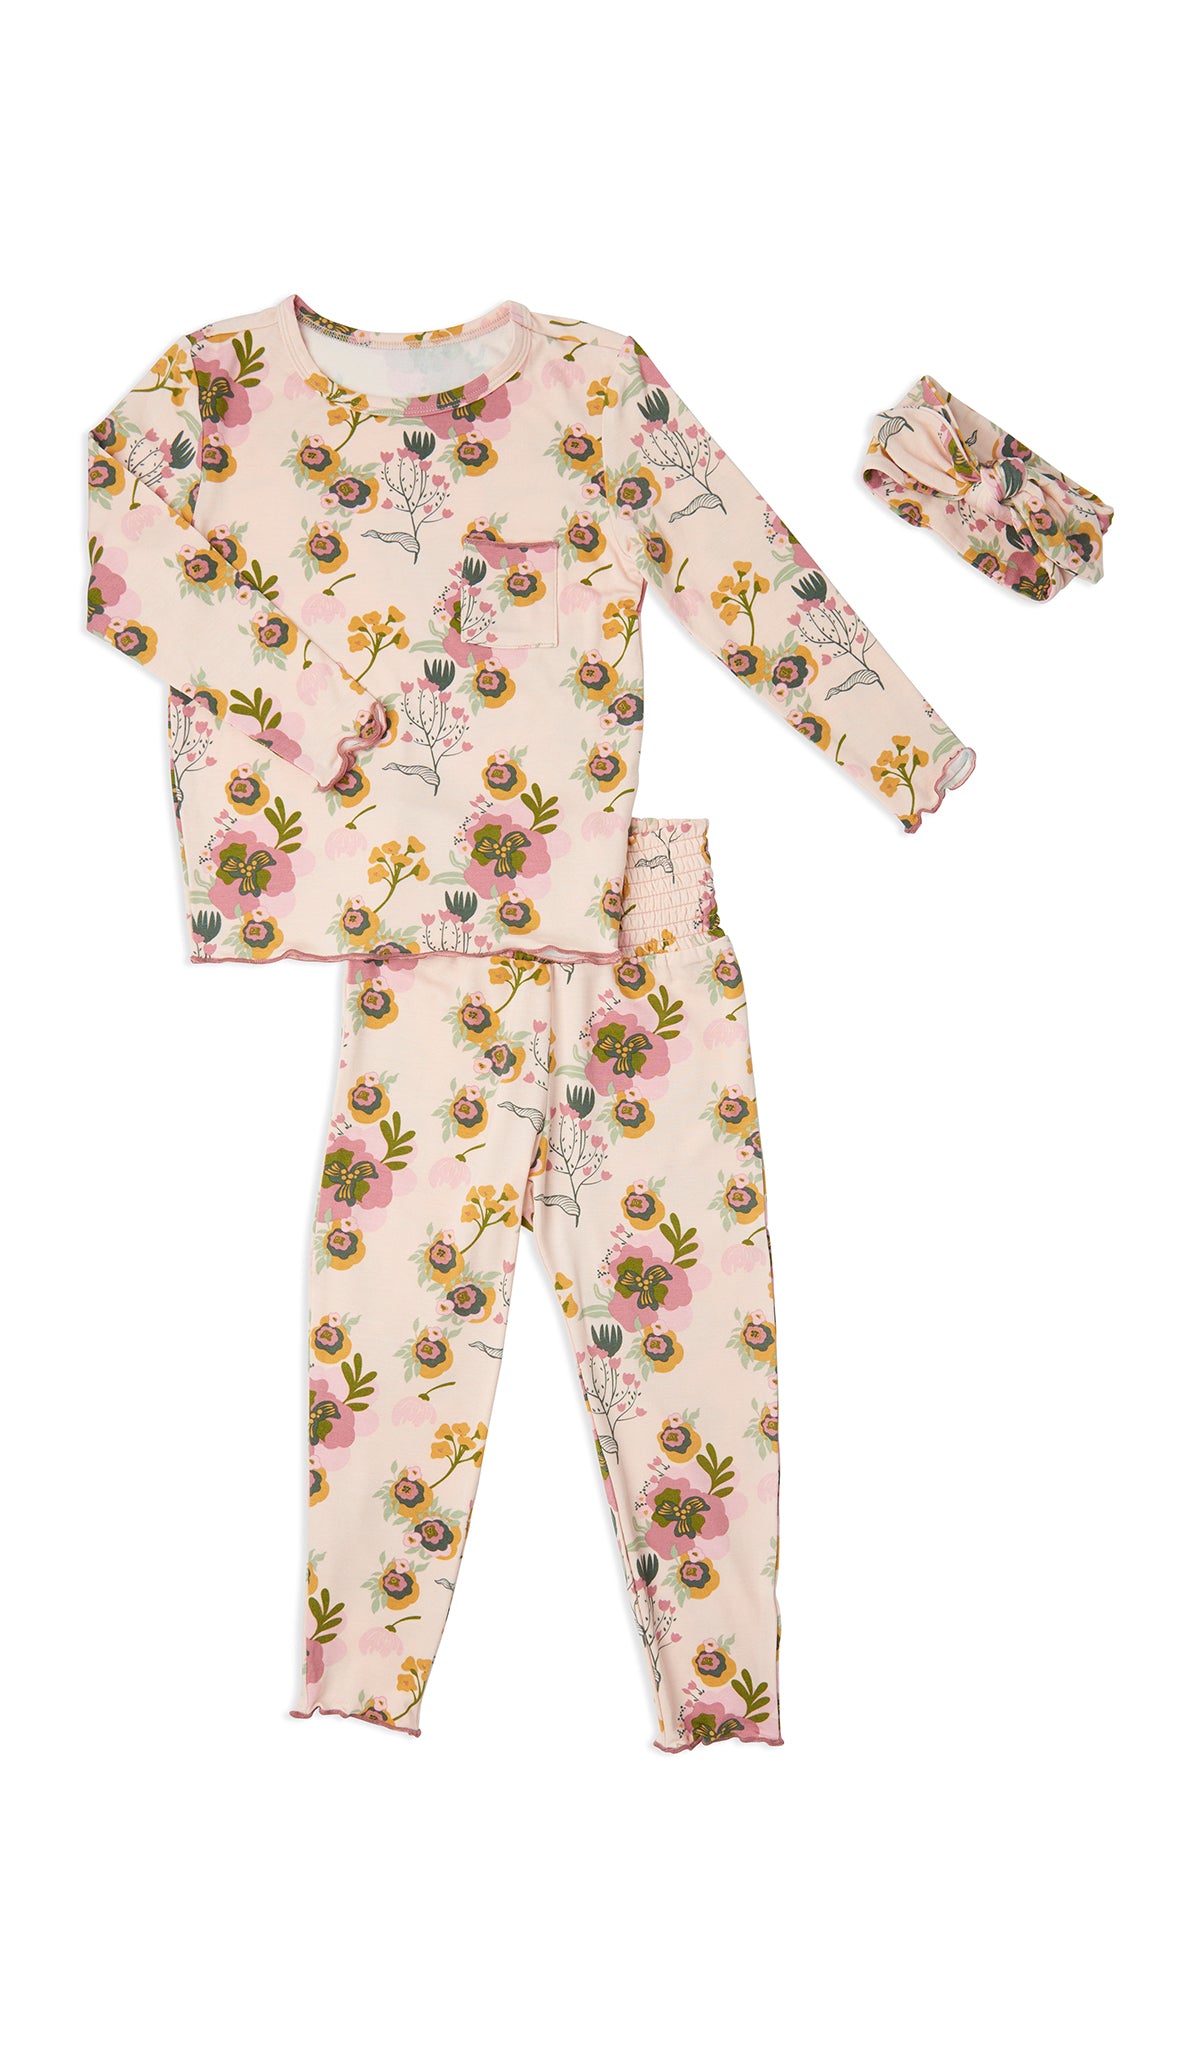 Camellia Charlie Baby 3-Piece Pant PJ. Long sleeve top with smocked waistband pant and matching headwrap. Lettuce trim detail on sleeve edge, top and pant hem.